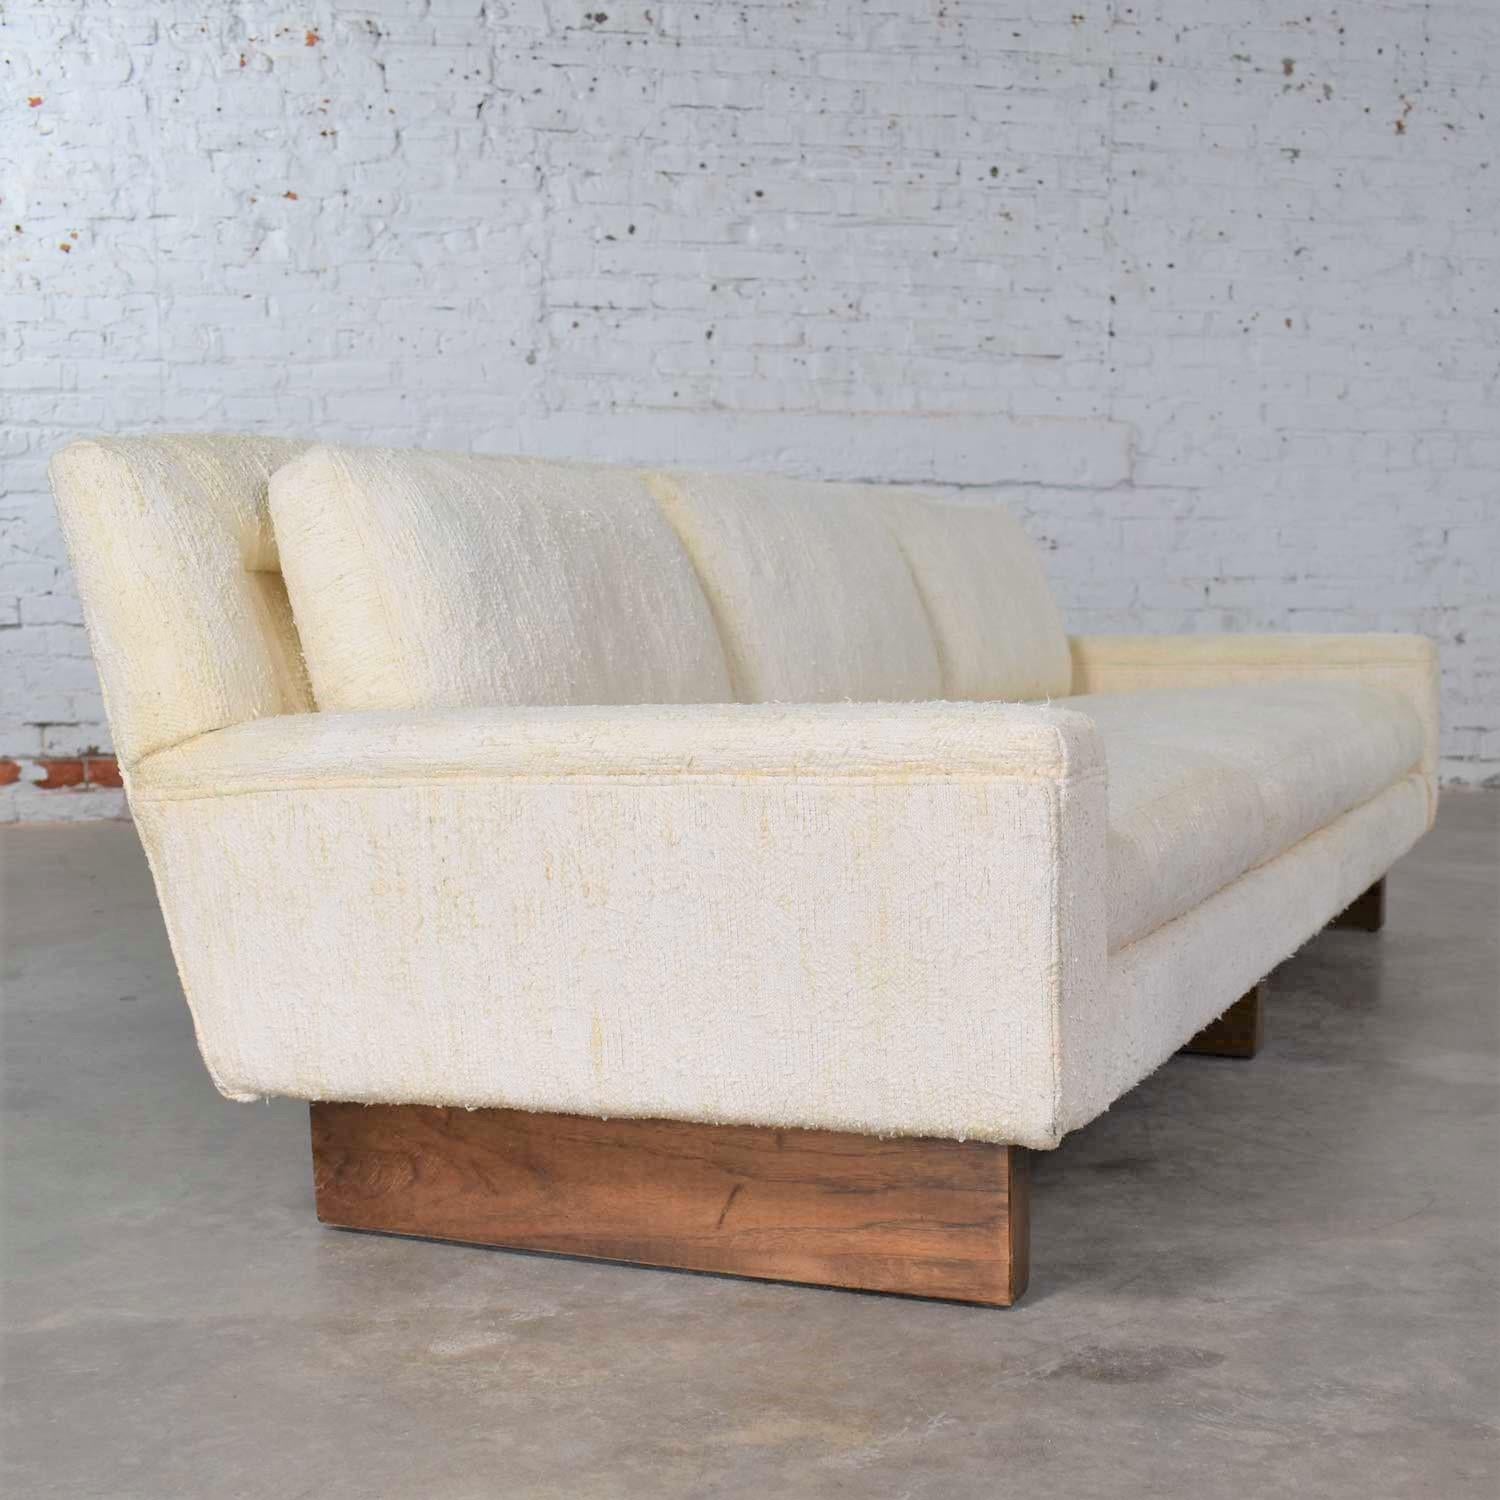 20th Century Mid-Century Modern Lawson Style White Sofa by Flair Division for Bernhardt